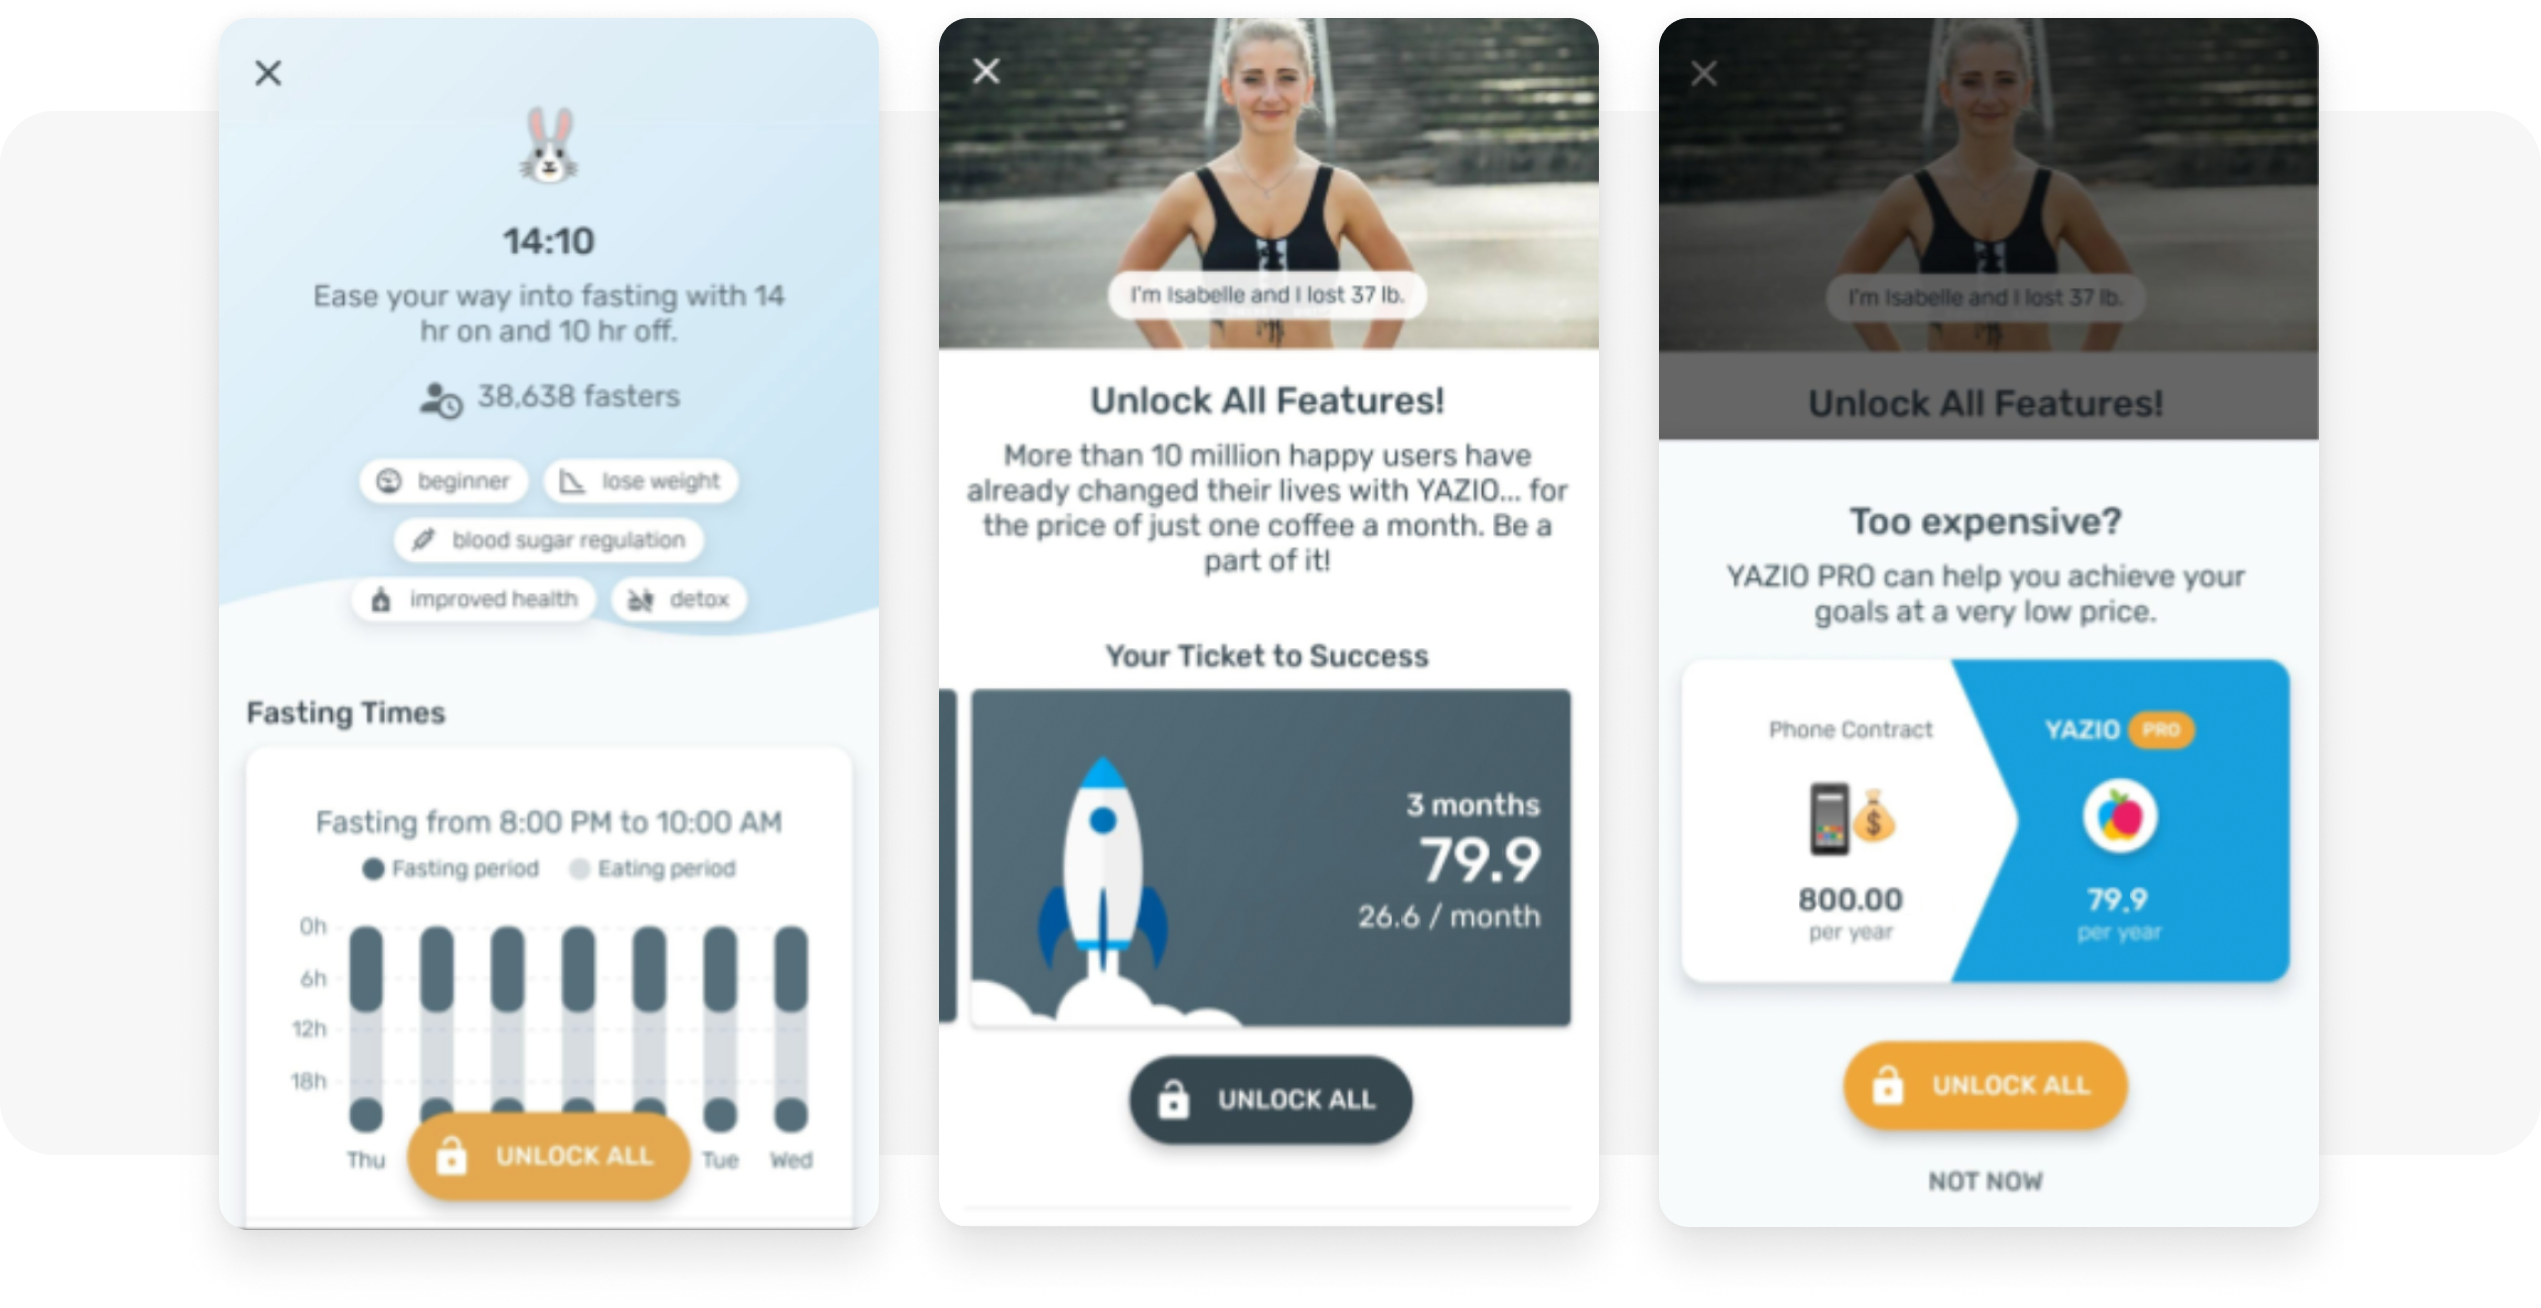 Automated messaging examples from a nutrition app